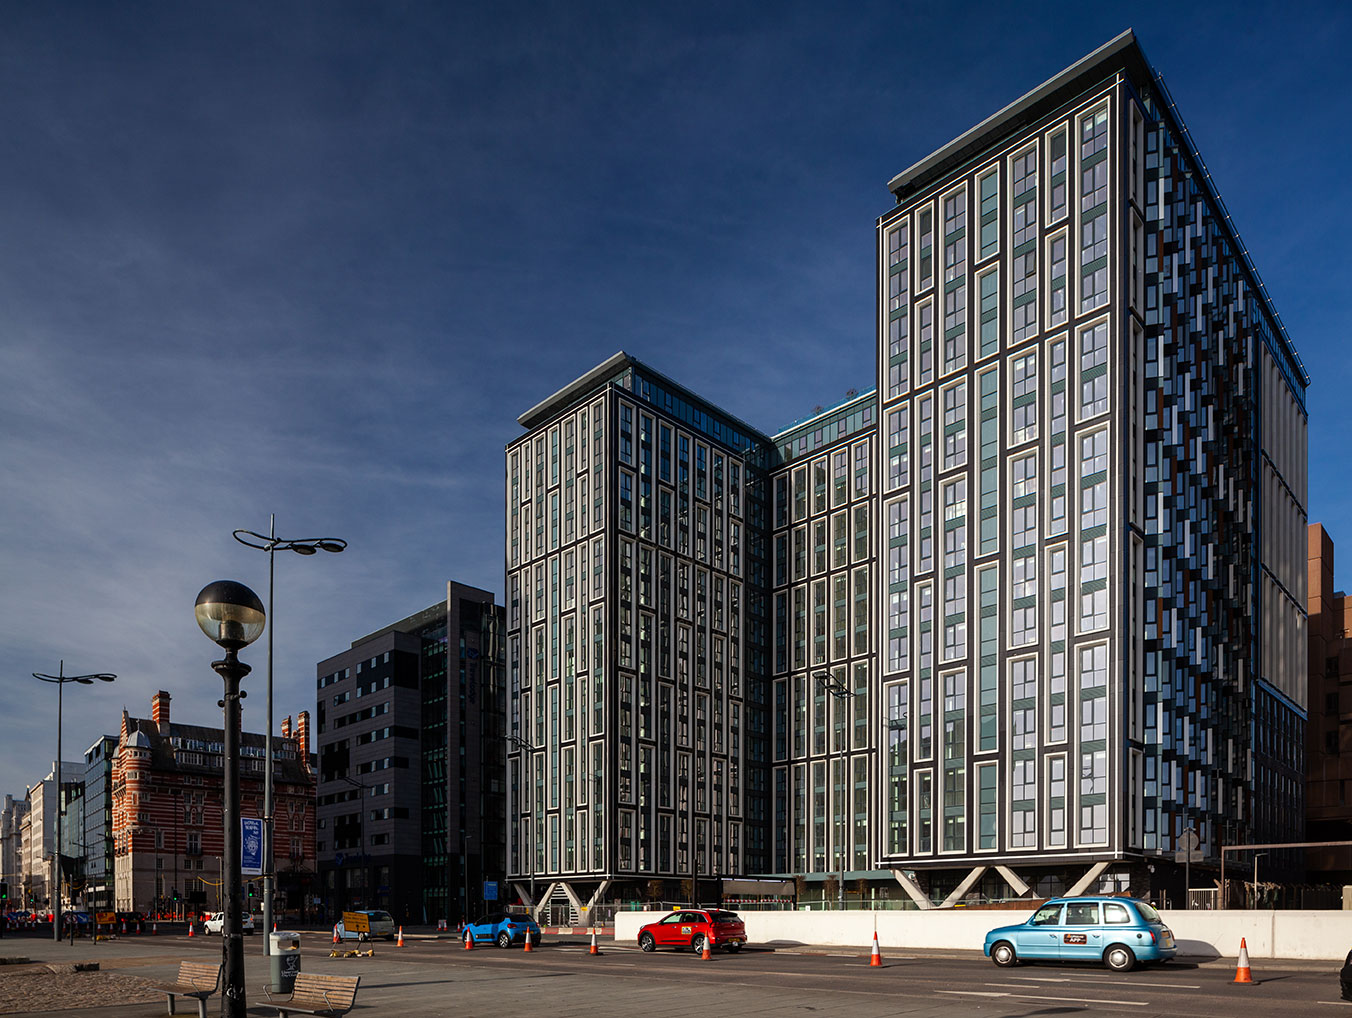 Panacea Hands Over its iconic Copper House 382 Unit BTR  scheme to INVESCO